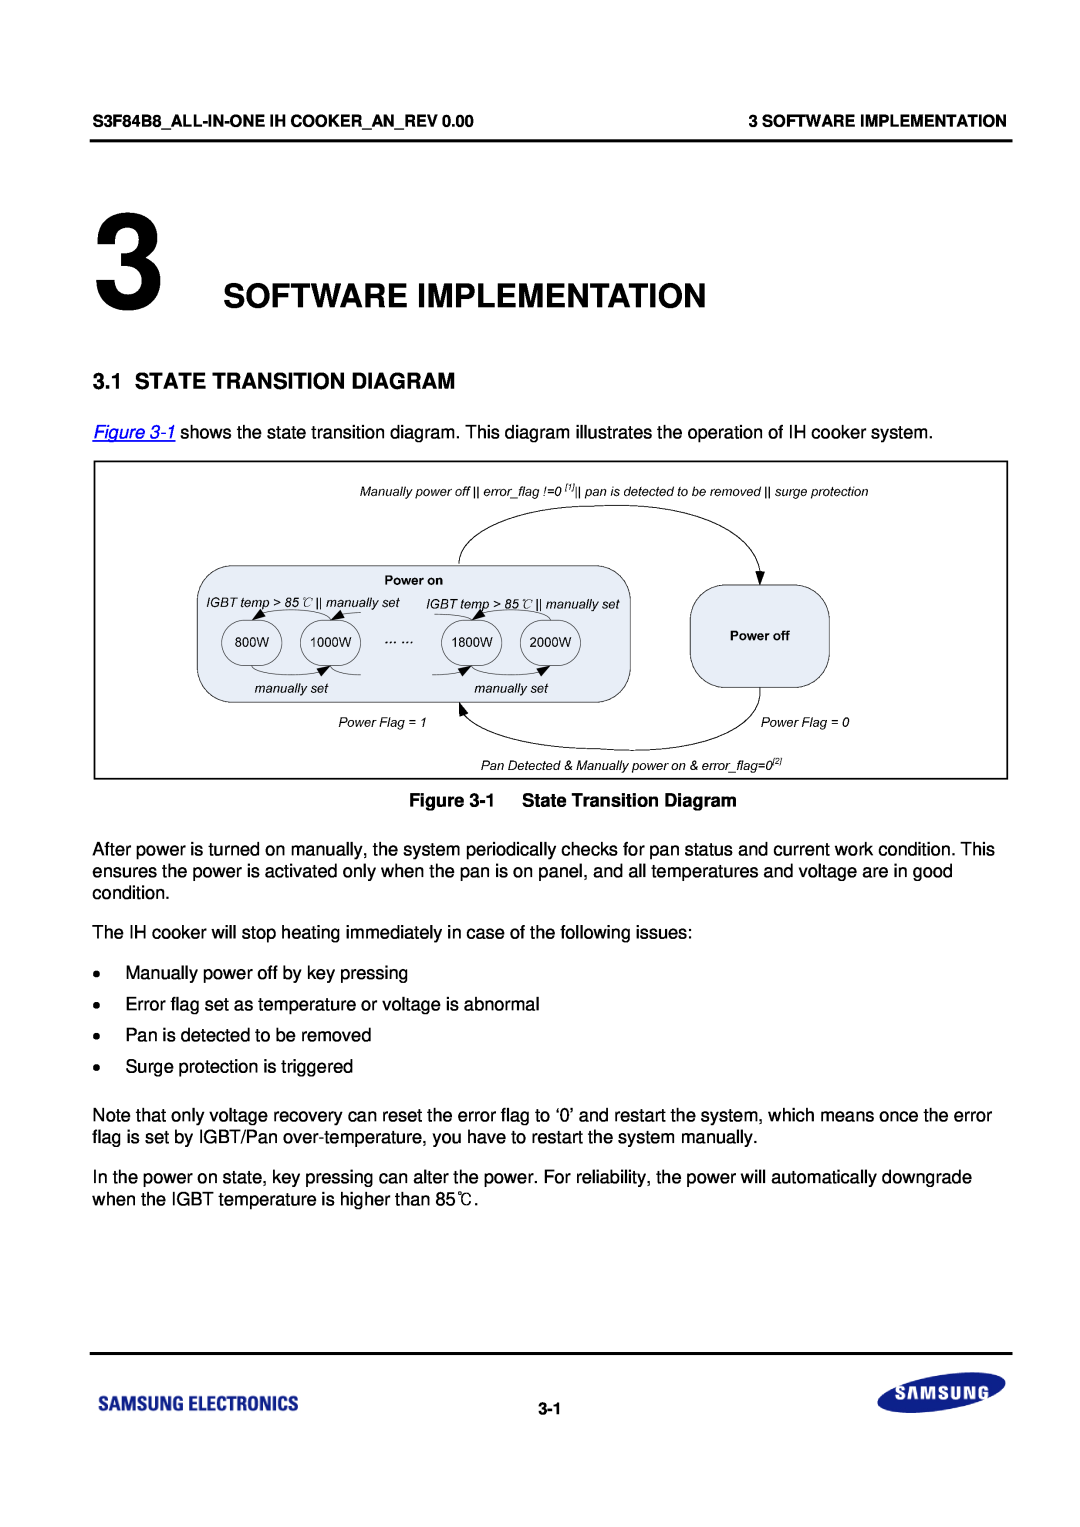 Samsung S3F84B8 manual Software Implementation, State Transition Diagram, 1 StateTransition Diagram 